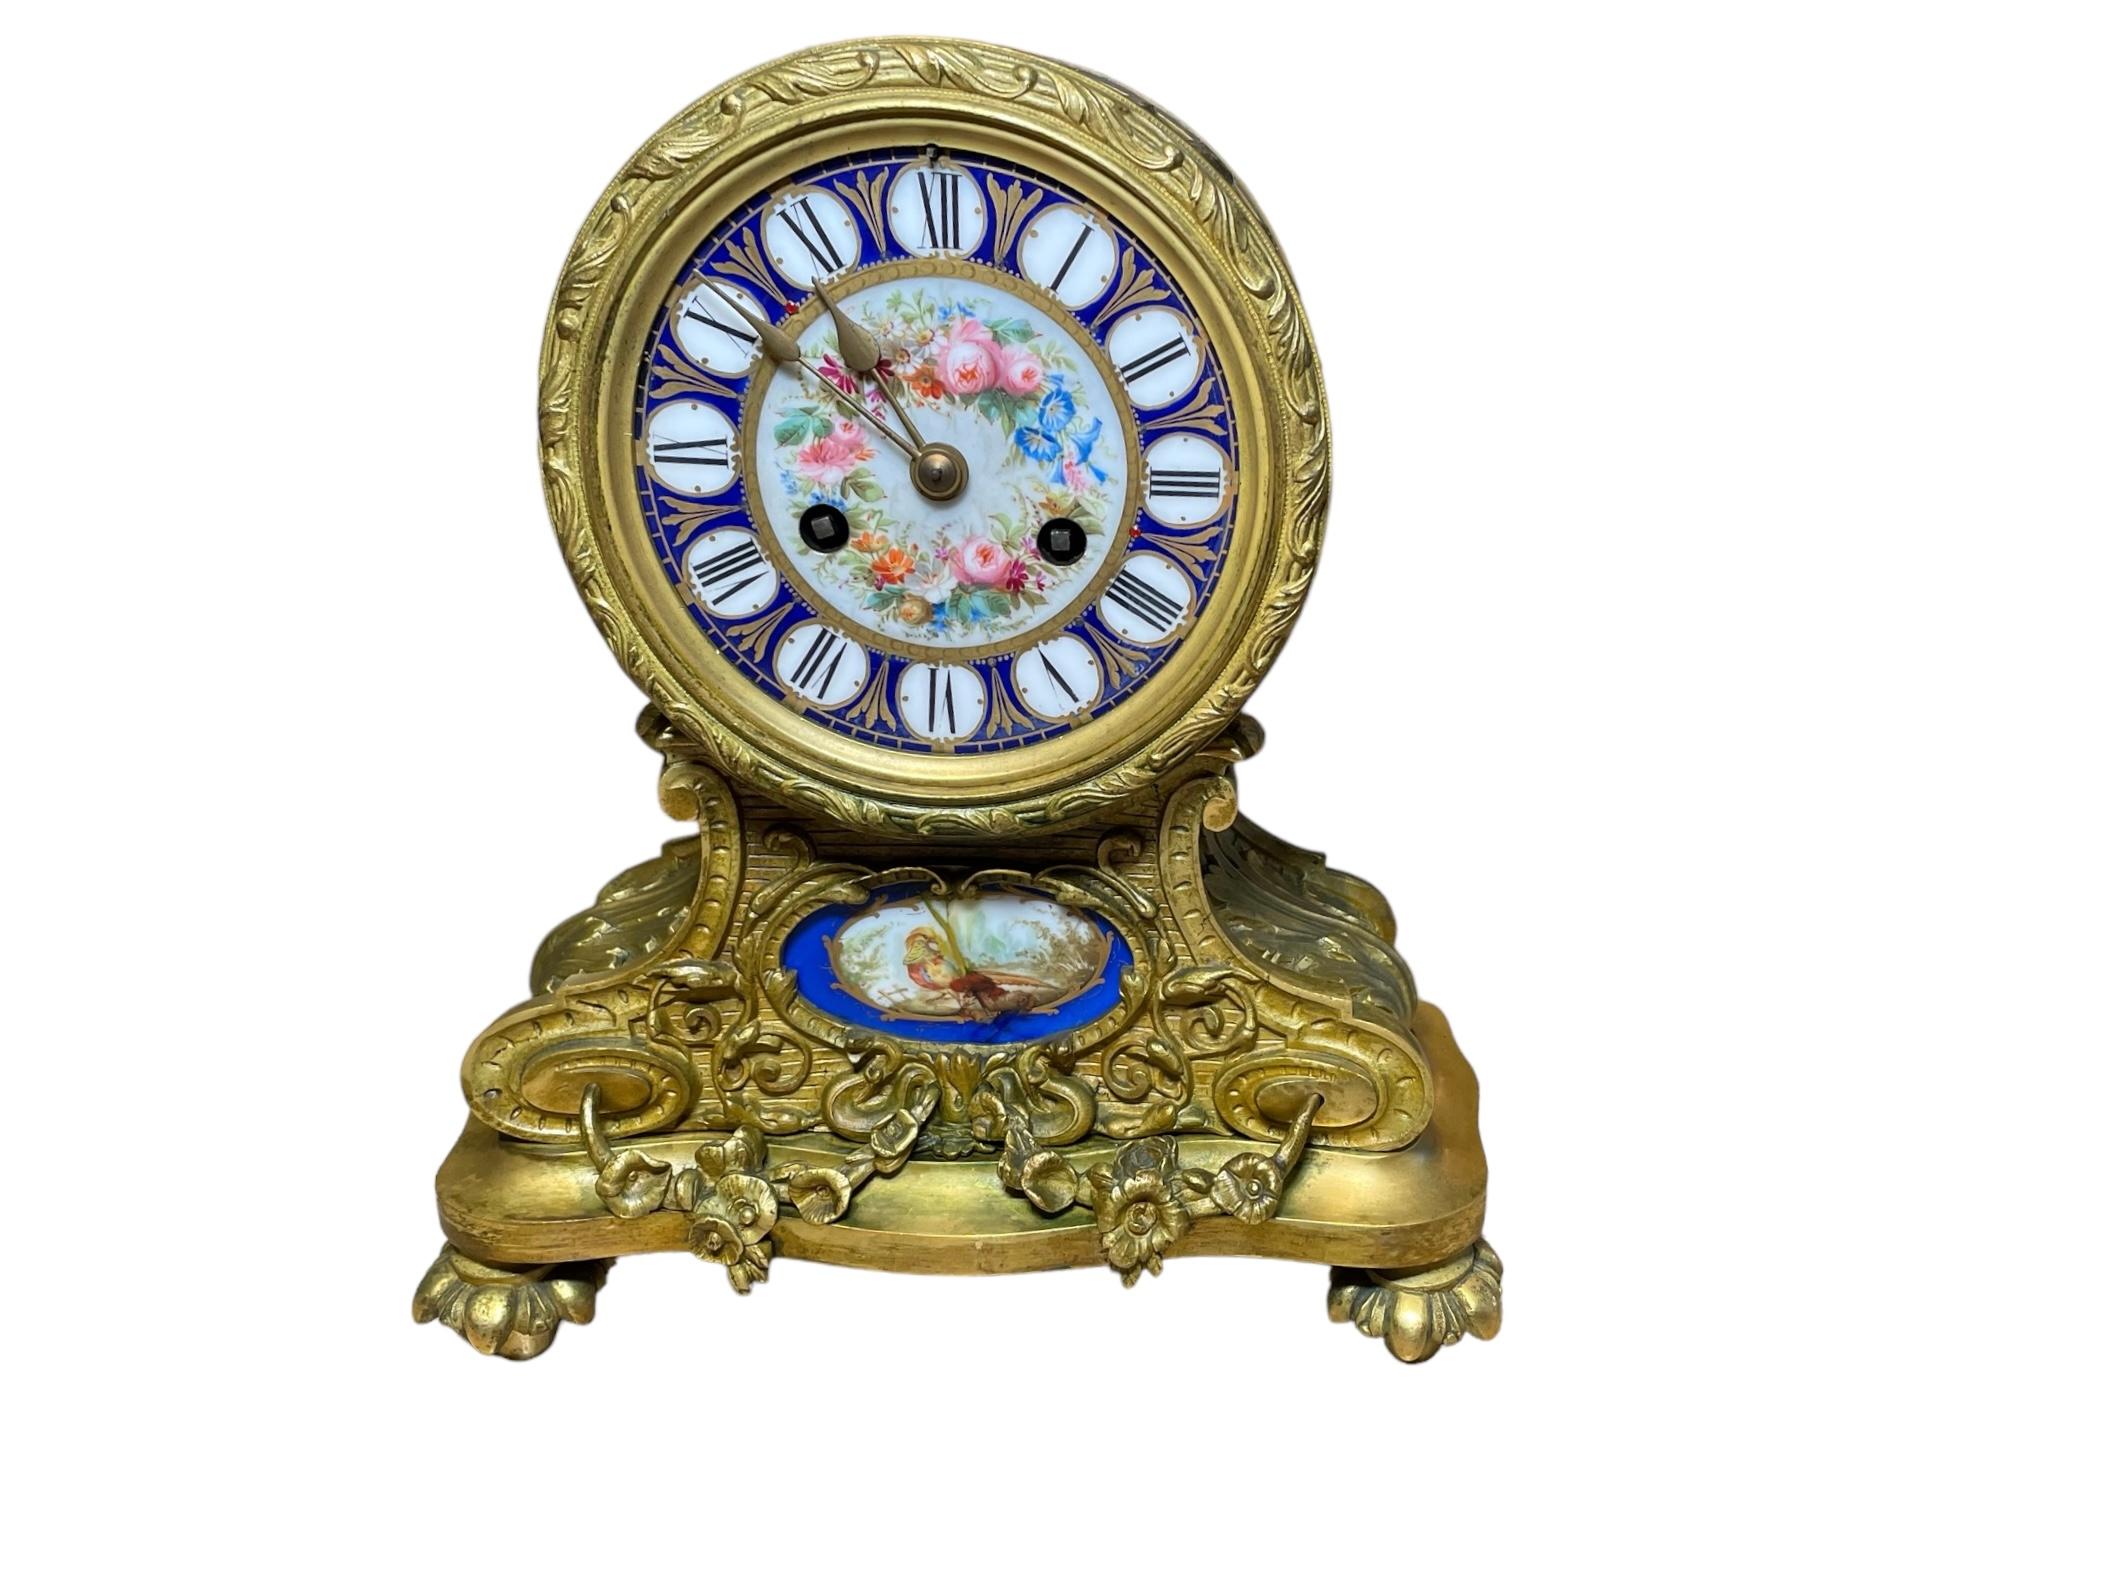 Jean Baptiste Delettrez Sevres Porcelain Gilt Bronze Mounted Drum Head Clock. It depicts a spherical royal blue porcelain dial with hand painted black Roman numbers in a round white background alternated by gilt leaves. Its center is decorated with